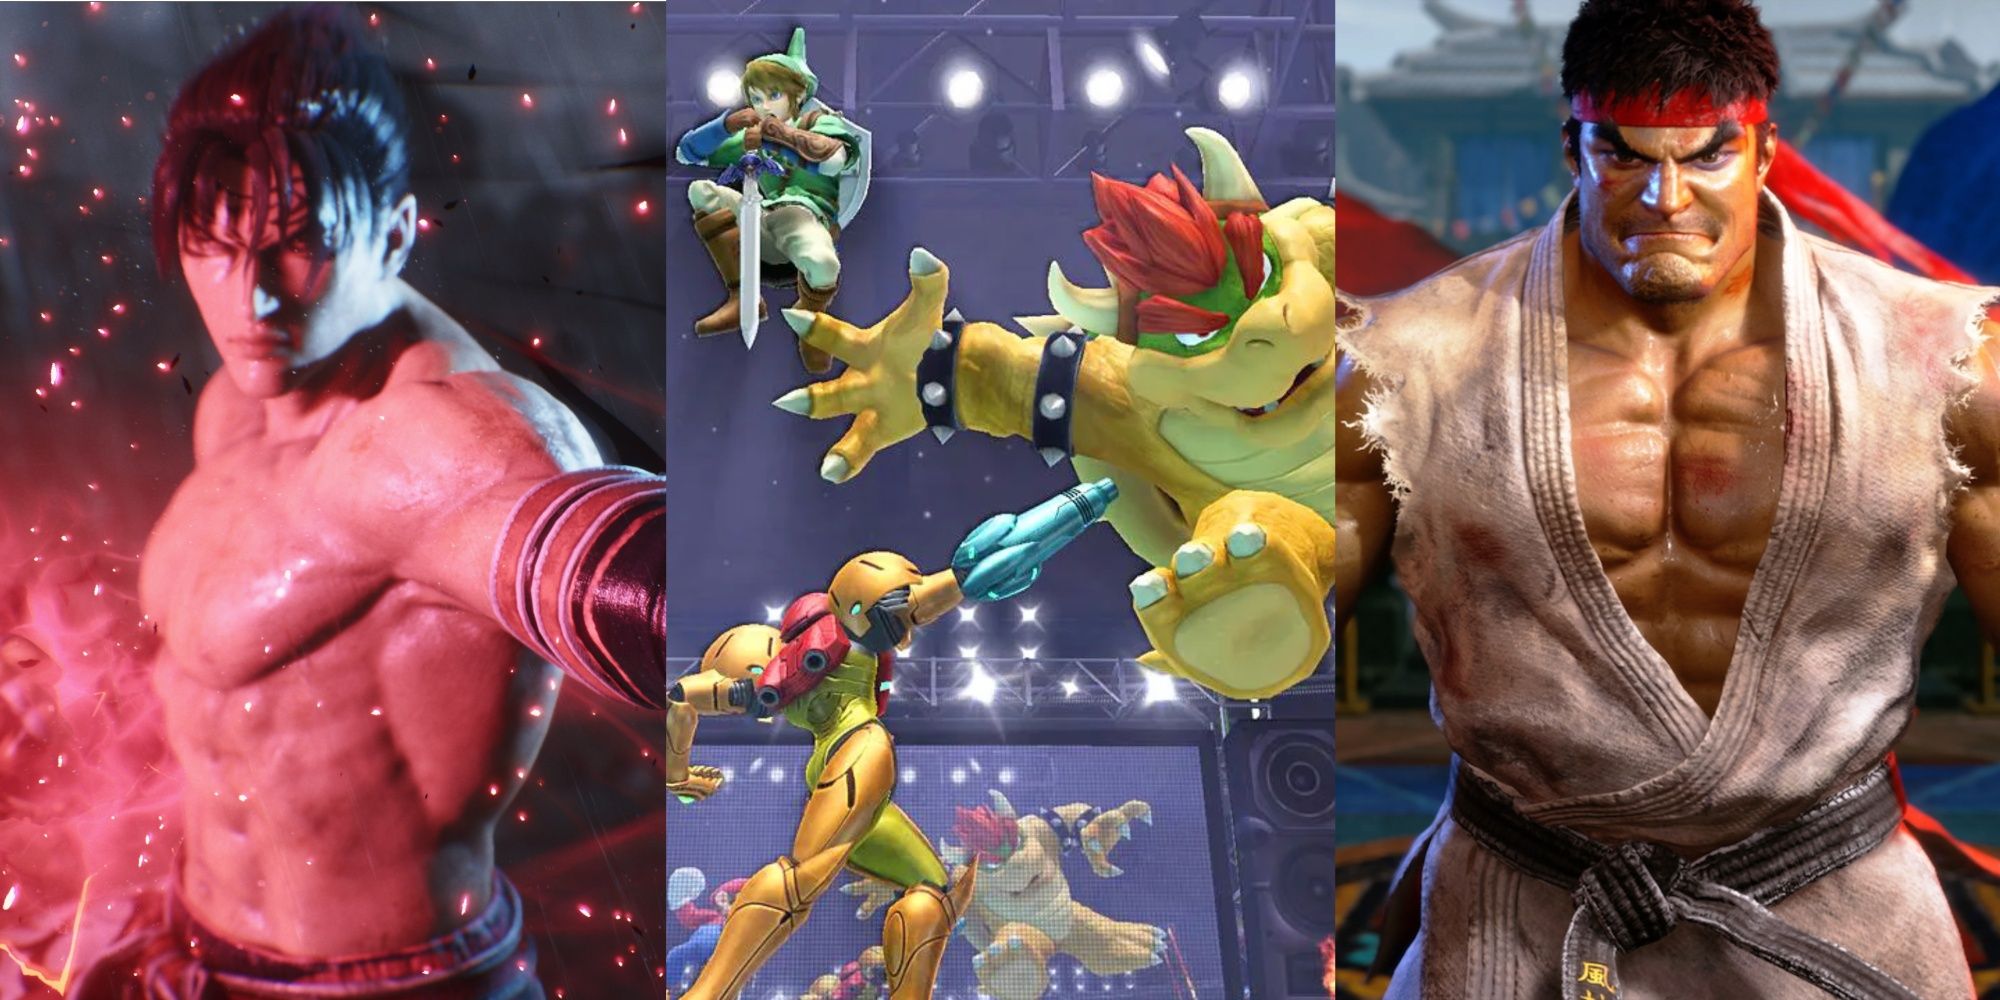 A Tekken character poses, Super Smash Bros characters fight, and Ryu poses